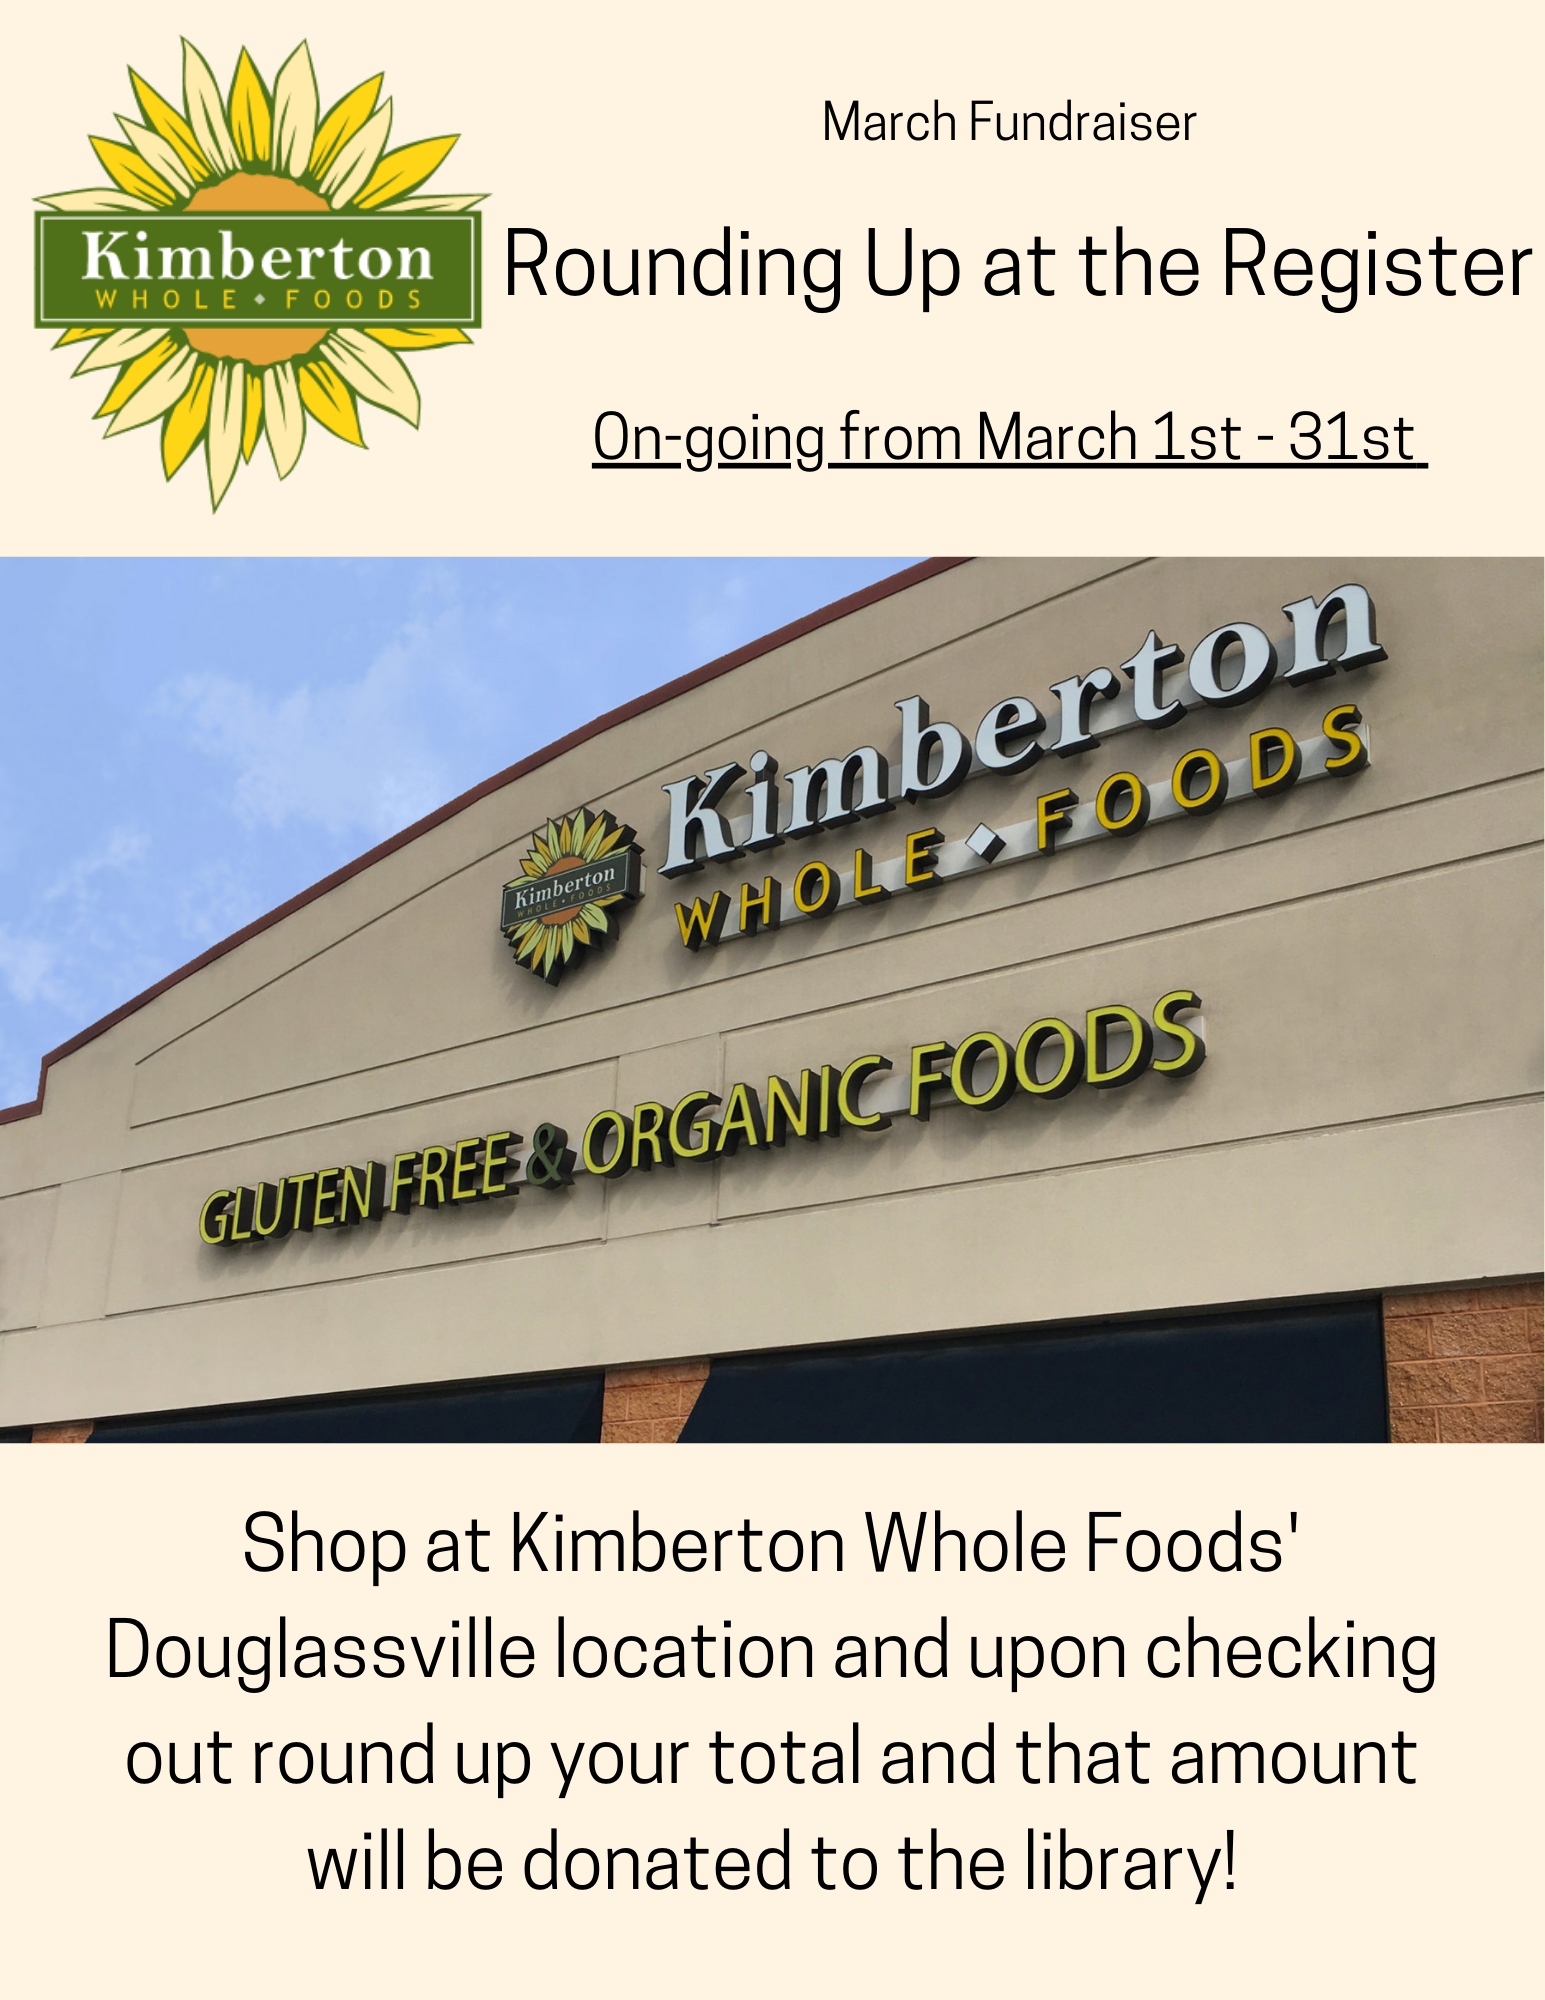 Kimberton store front on flyer with information regarding Rounding Up At the Register program